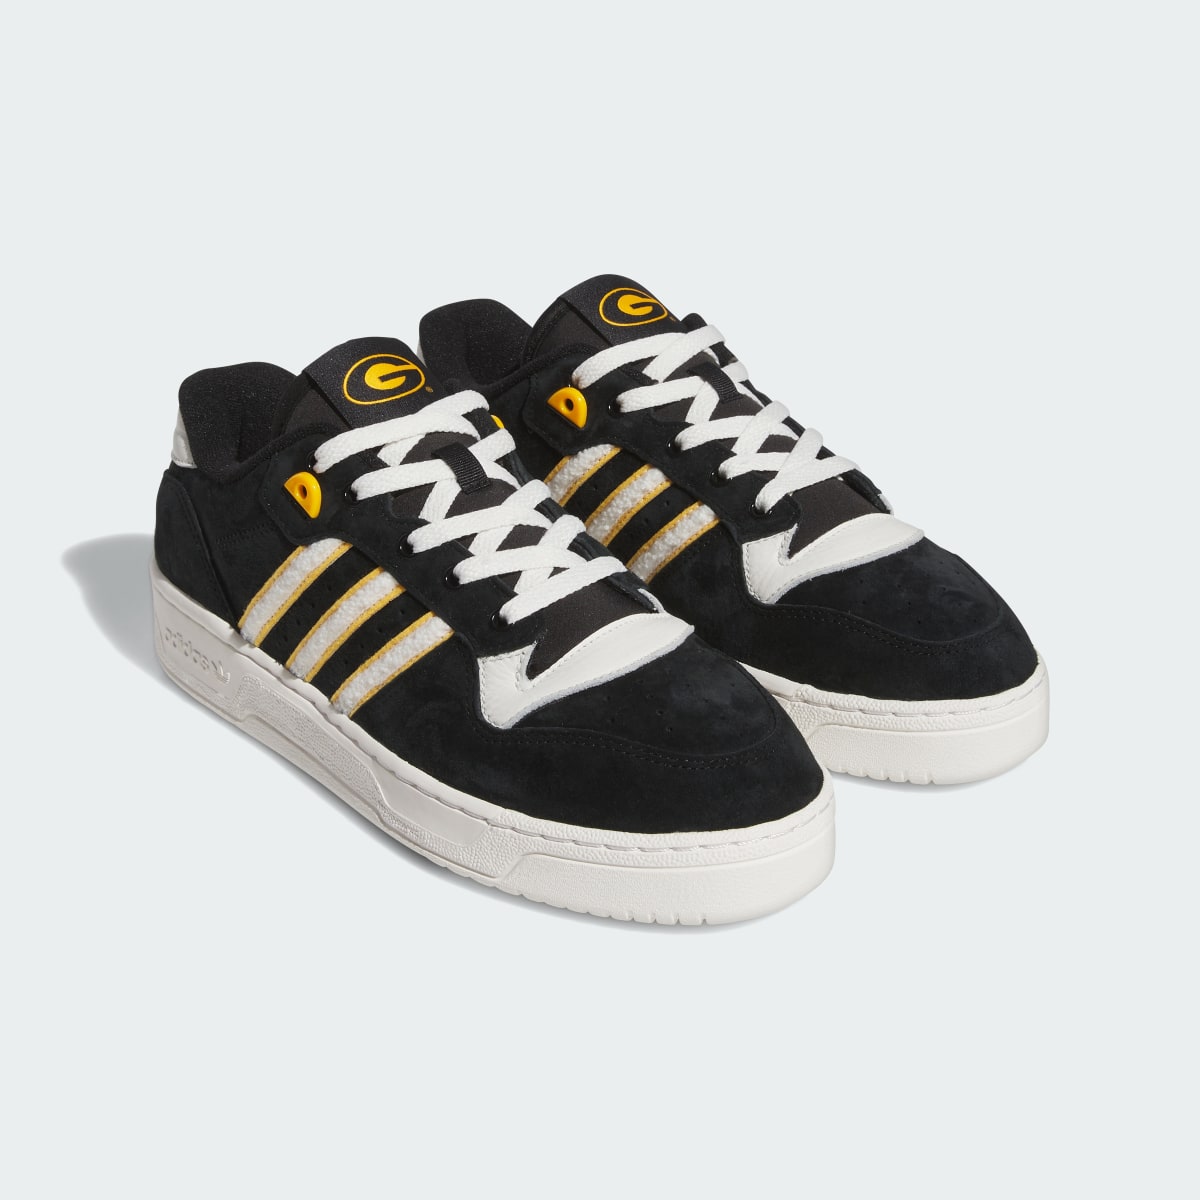 Adidas Grambling State Rivalry Low Shoes. 5